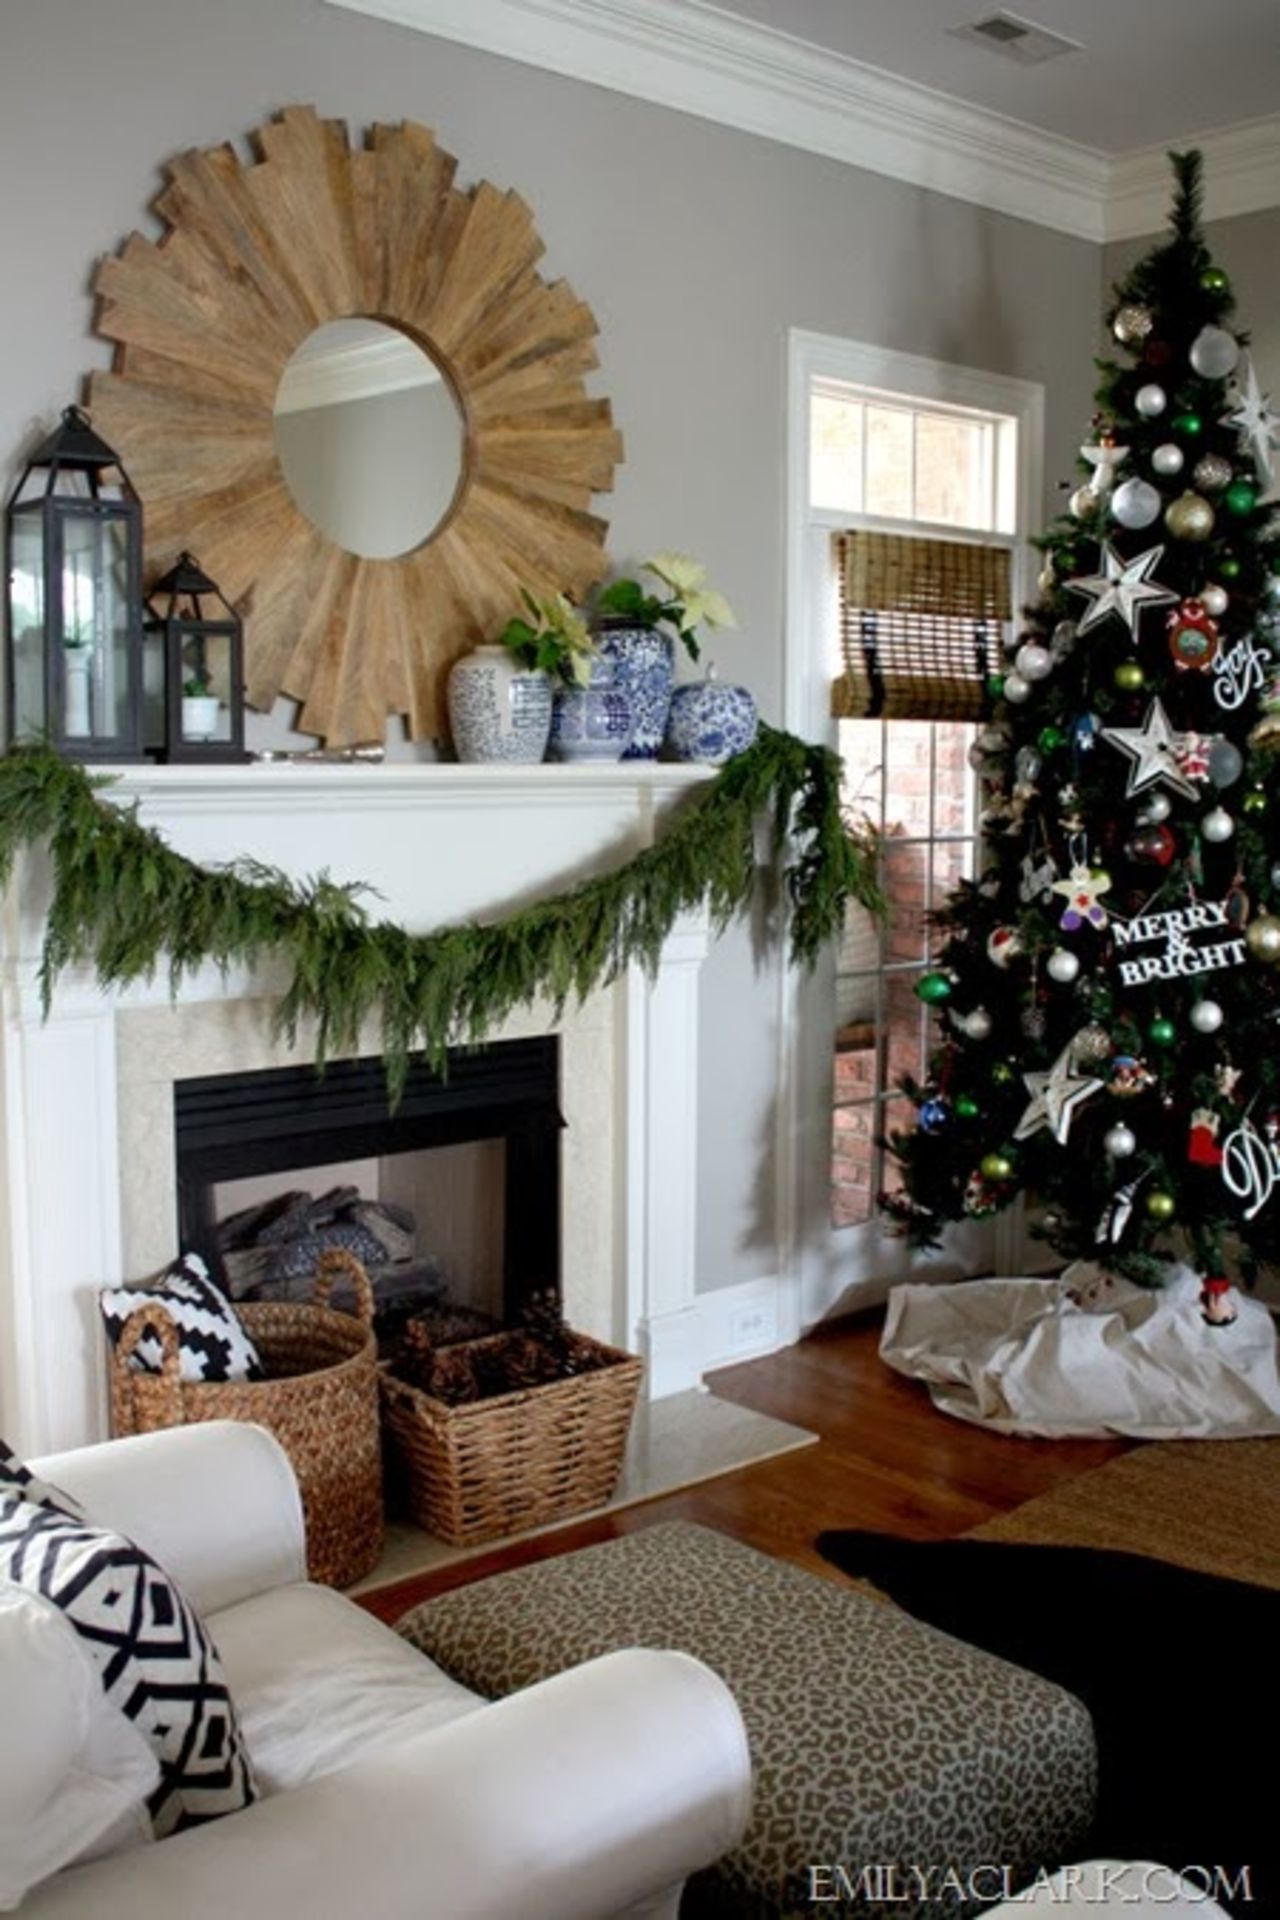 Emily Clark's holiday decor builds off of nature-inspired elements.